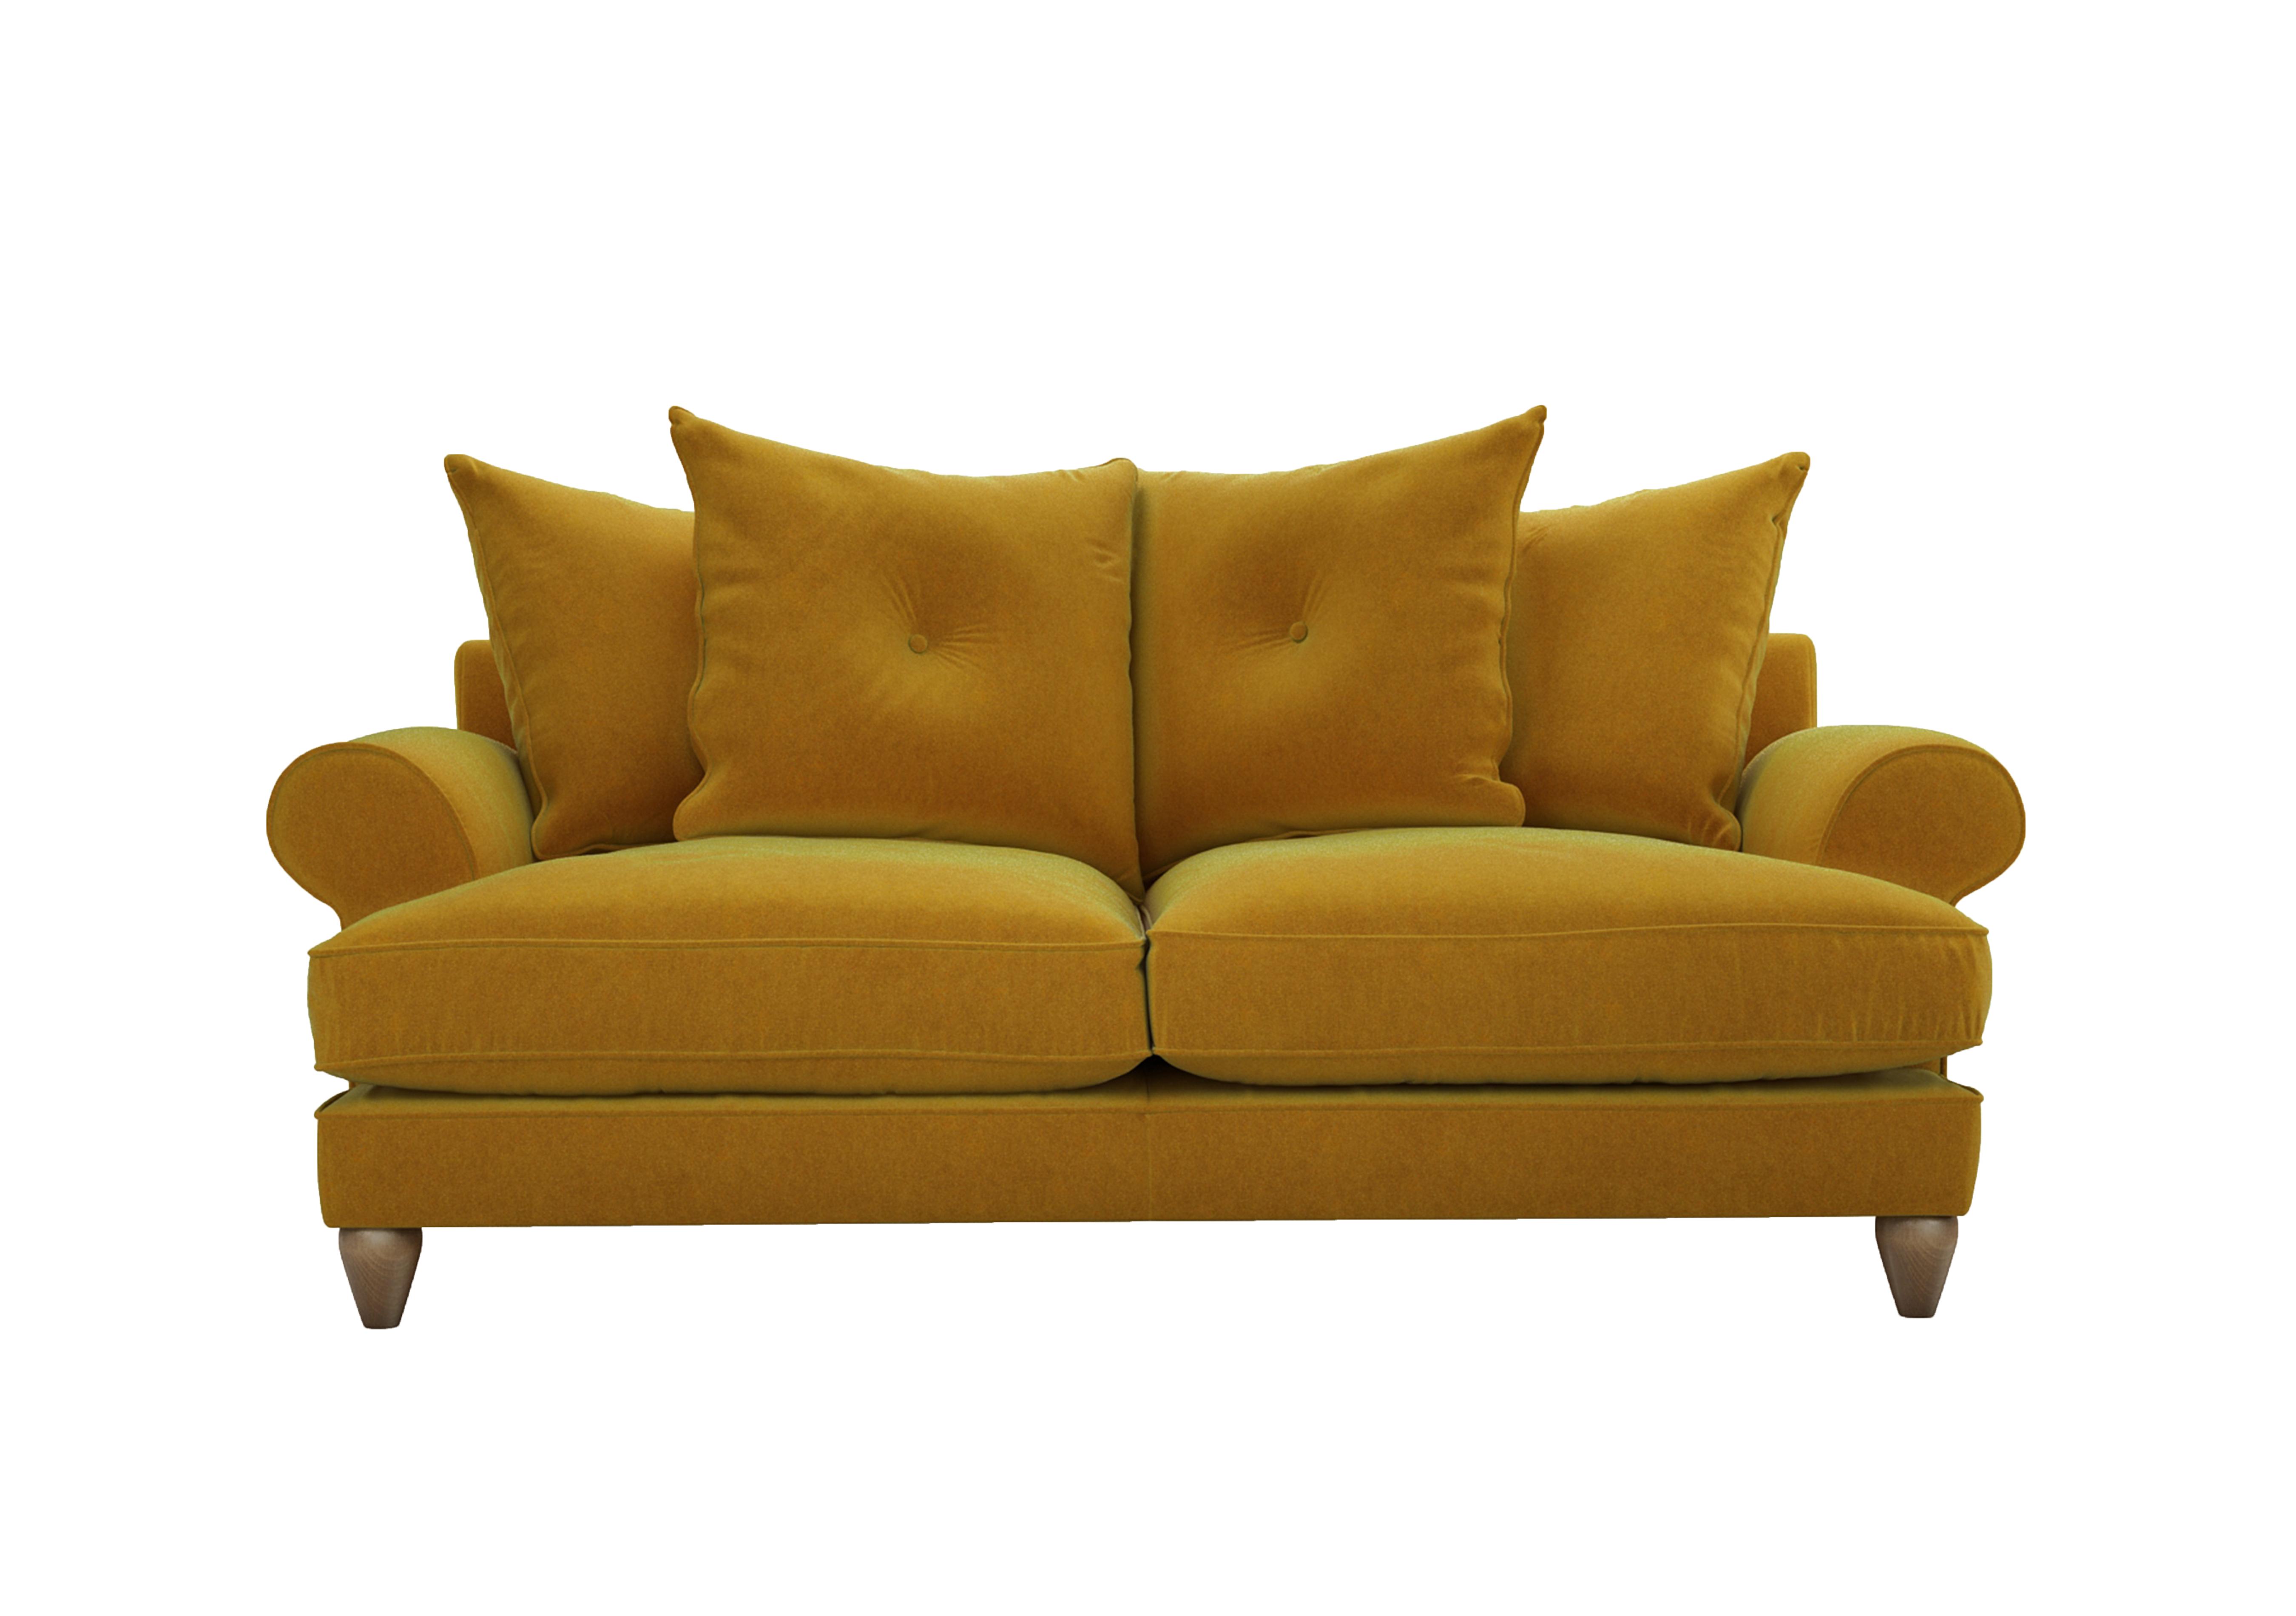 Bronwyn 3 Seater Fabric Scatter Back Sofa in Gol204 Golden Spice on Furniture Village